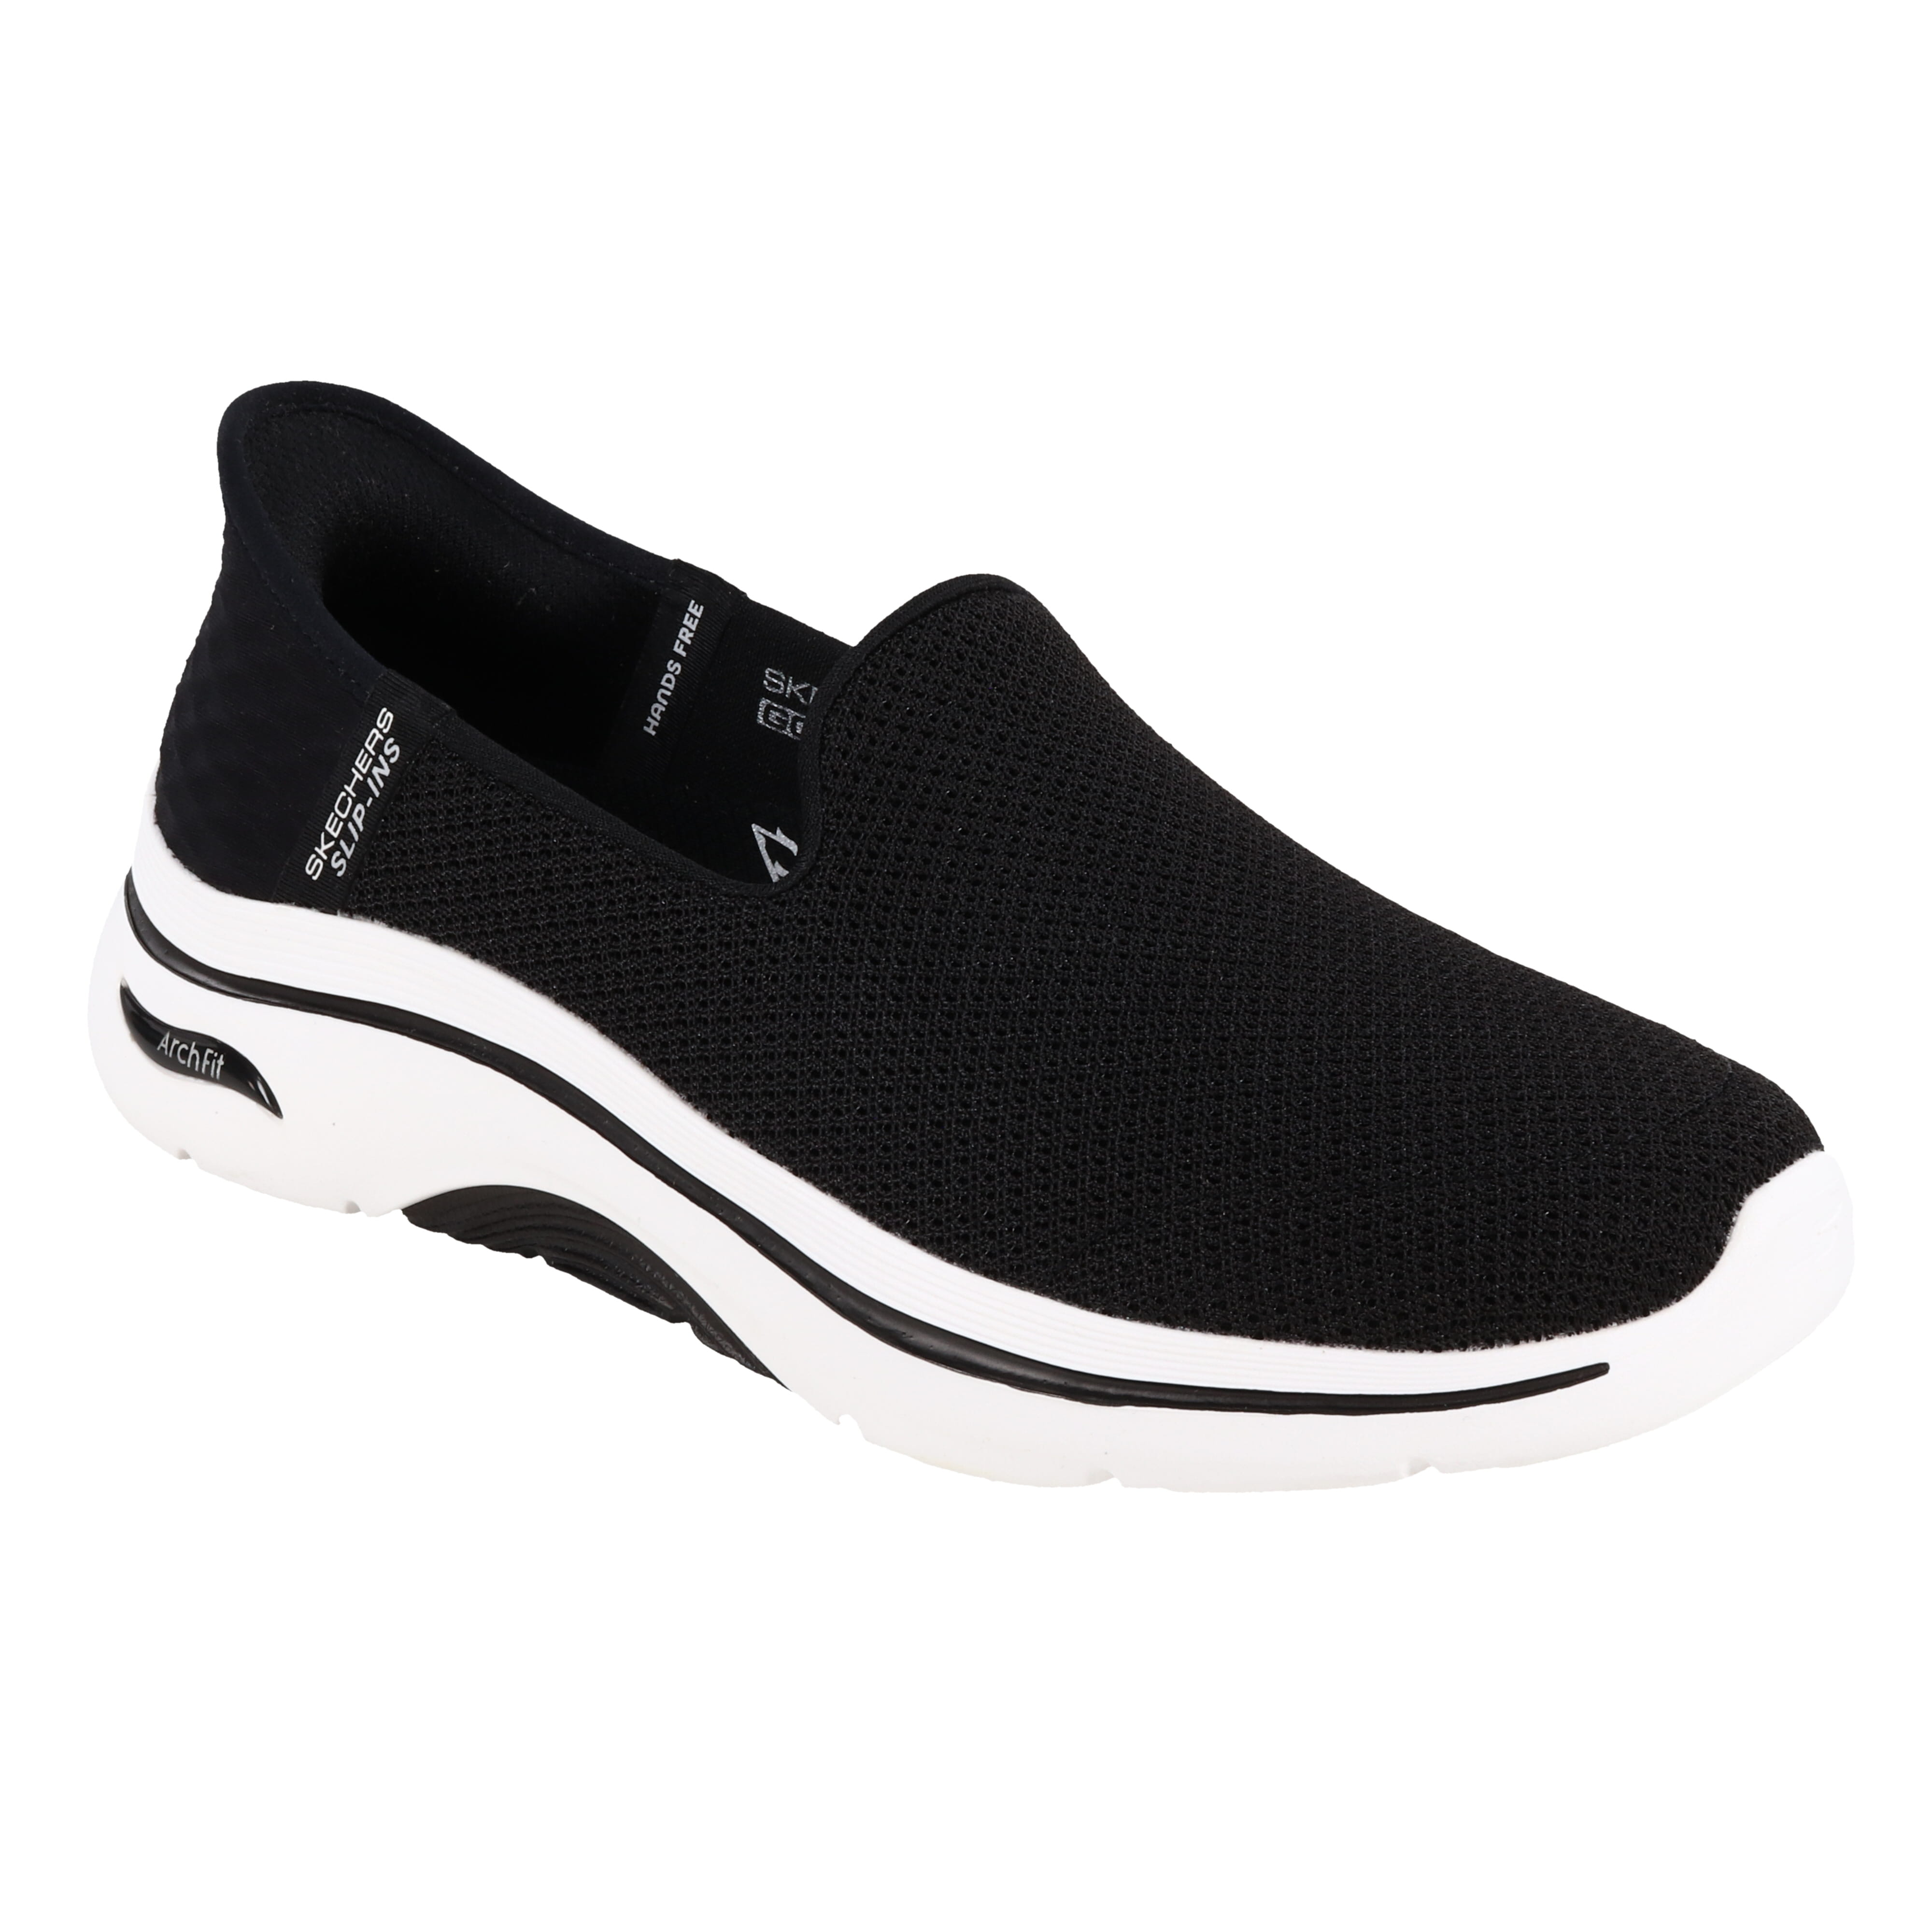 Shop the Skechers Slip-ins: Arch Fit 2.0 - Grand Select 2